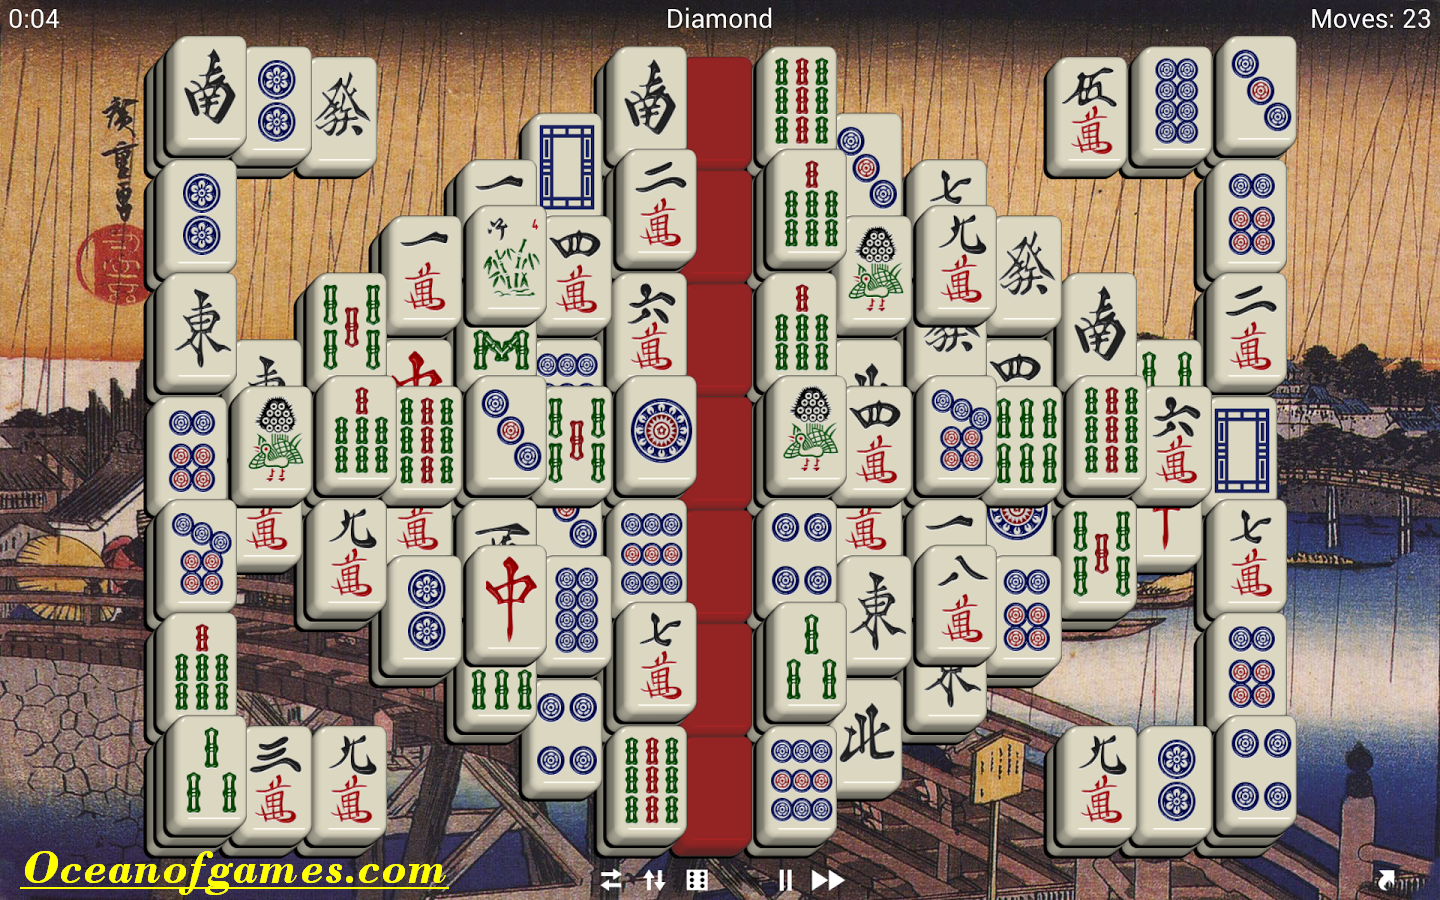 Mahjong Quest - Free Online Game at